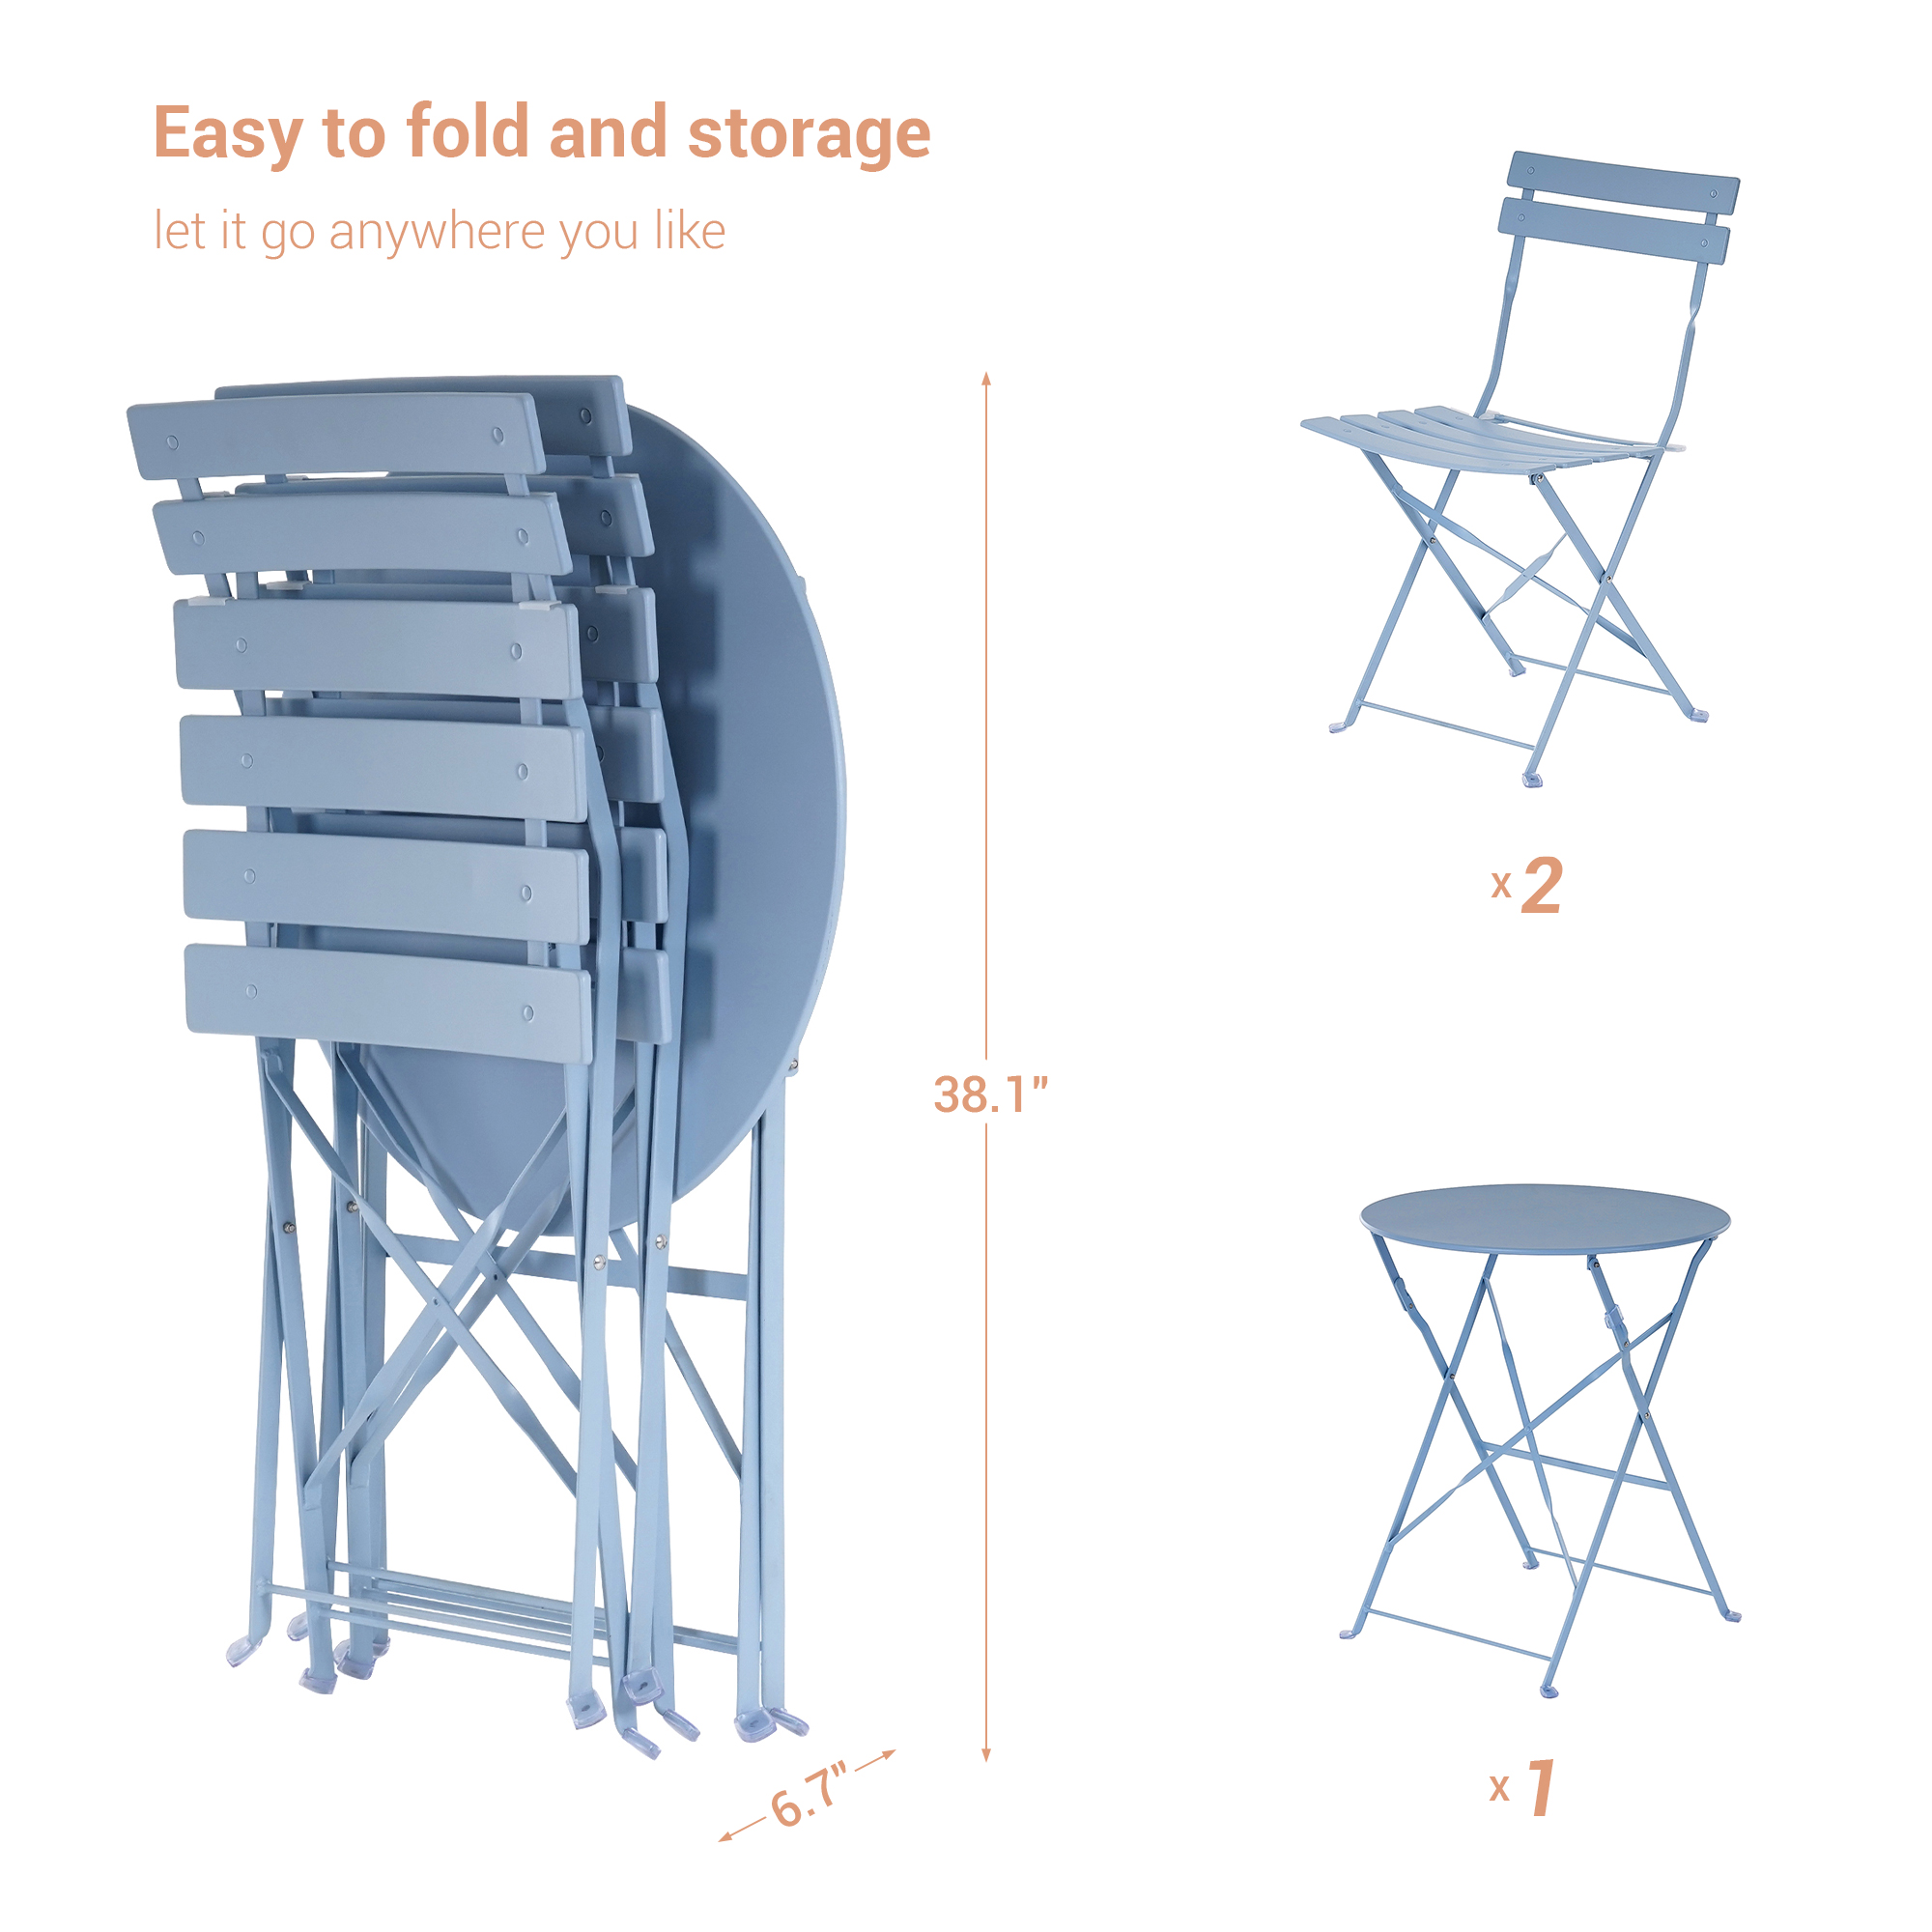 ACEGOSES 3 Pces Patio Folding Chairs with a Steel Frame Table for Garden, Deck and Yards,Turquoise blue - image 2 of 7